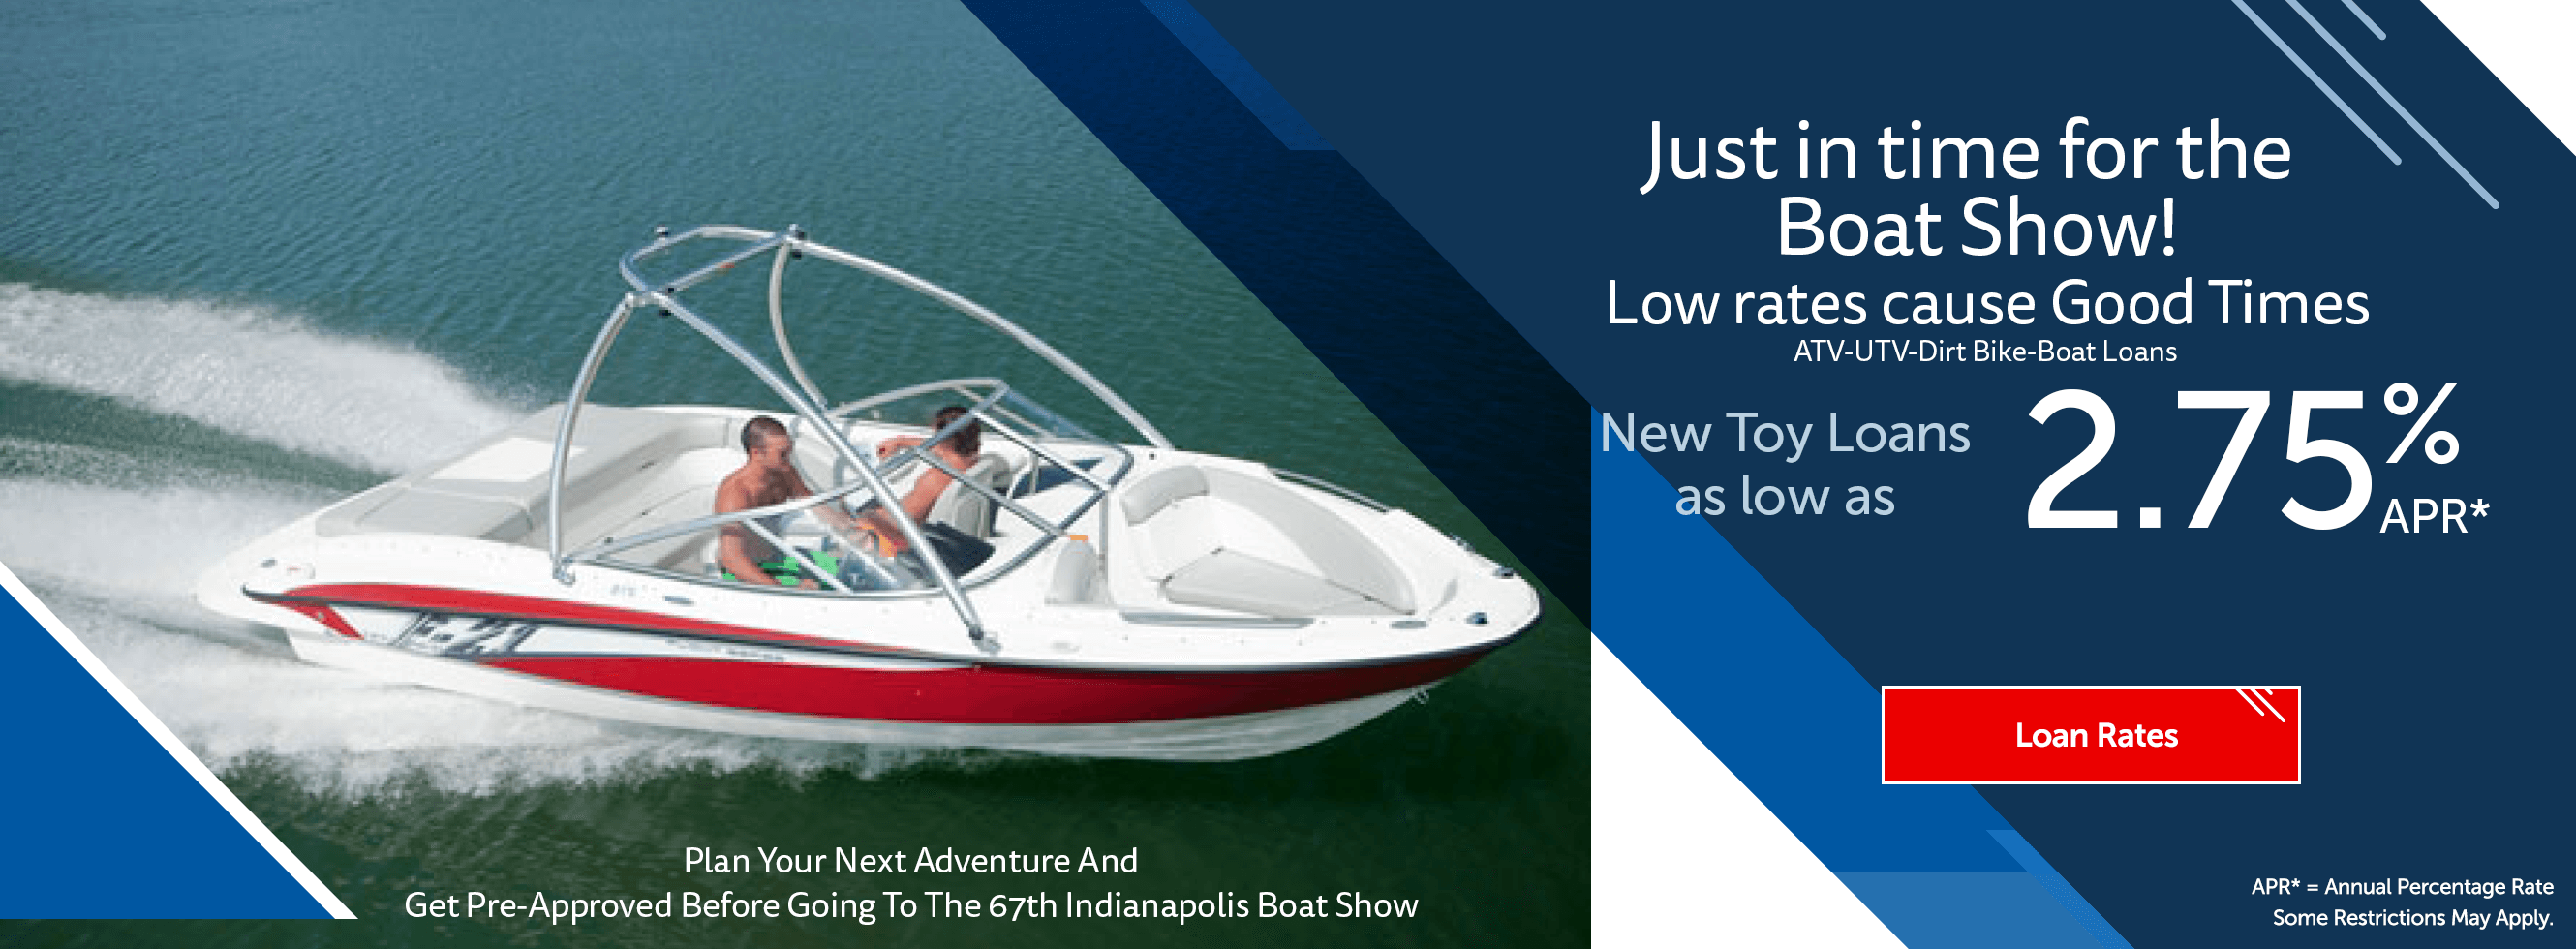 Just in time for the Boat Show! Low rates may cause Good Times ATV-UTC-Dirt Bike-Boat Loans